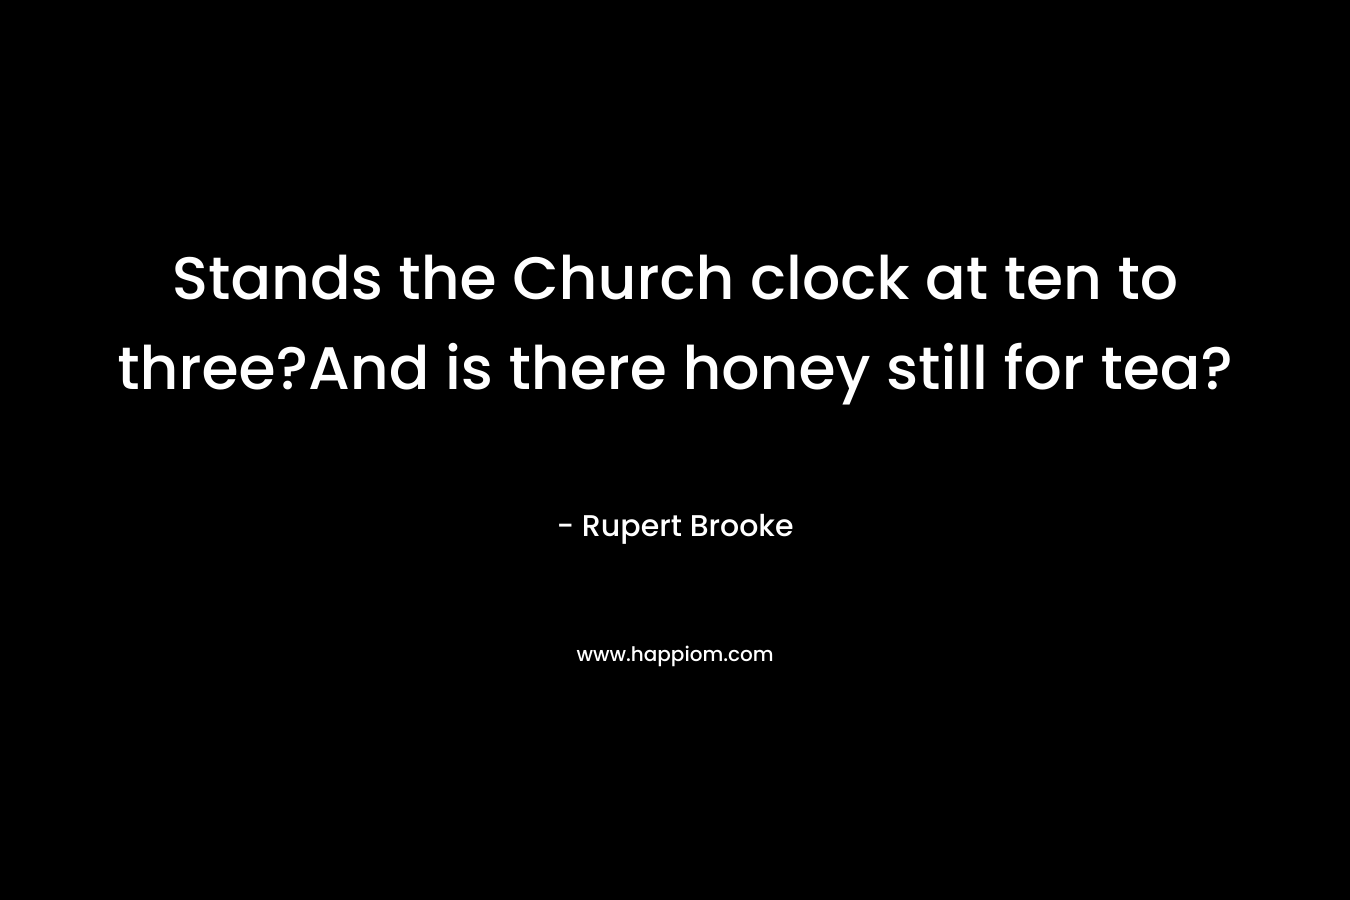 Stands the Church clock at ten to three?And is there honey still for tea?